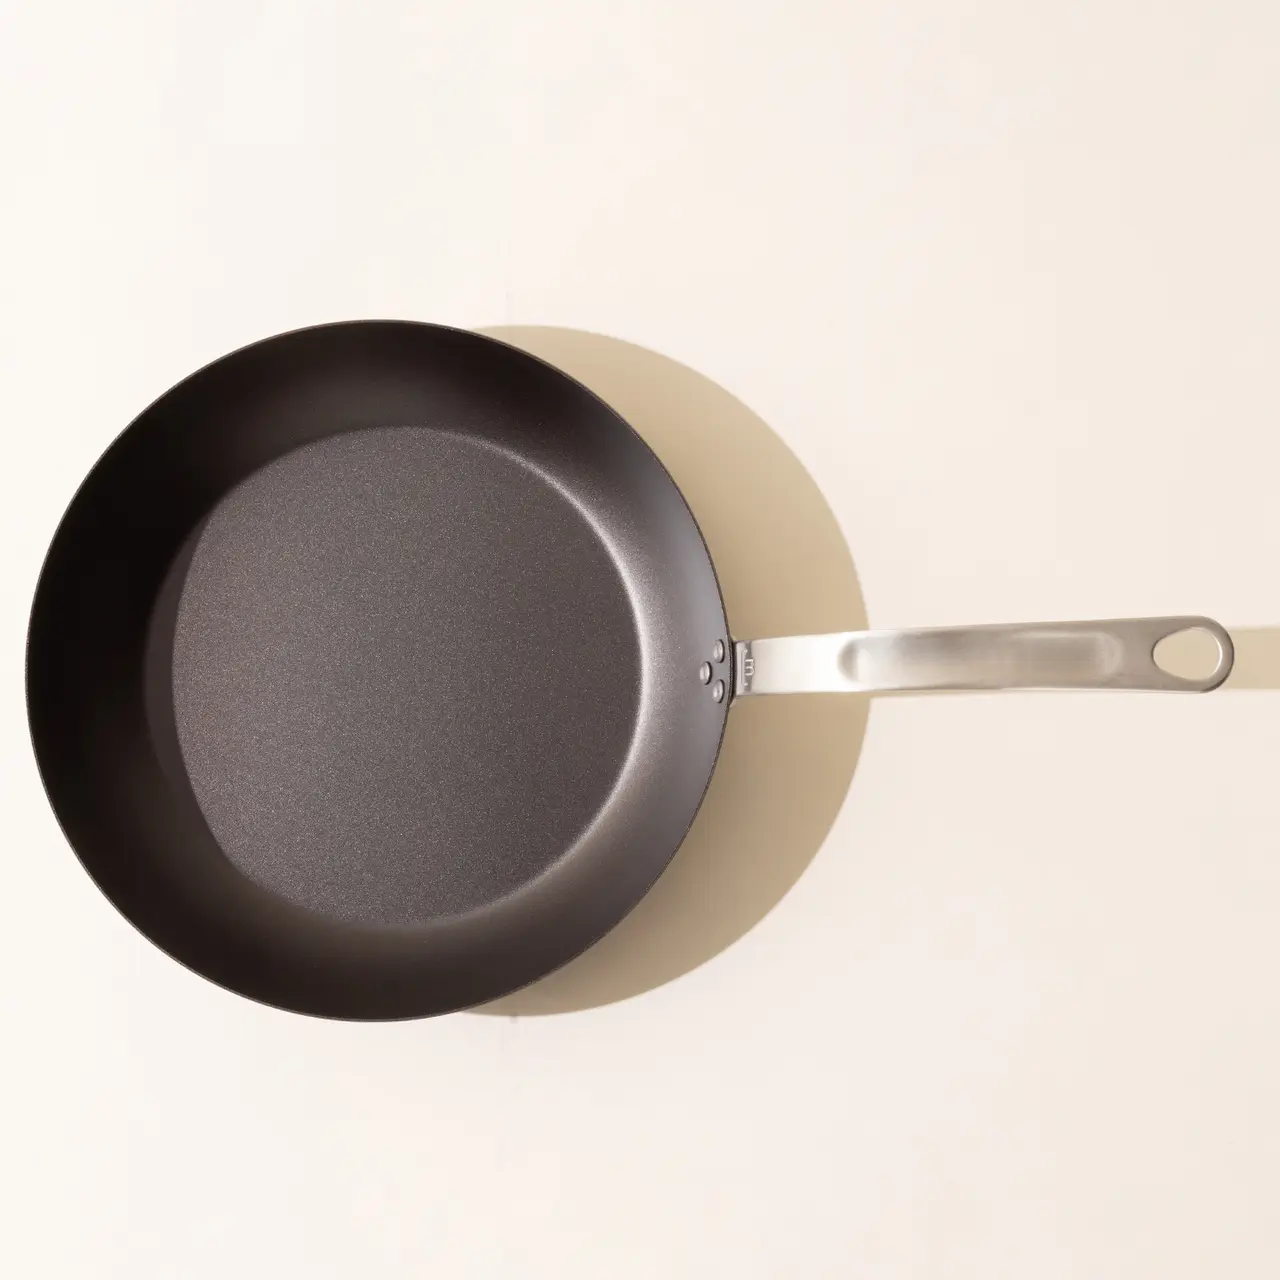 A new non-stick frying pan with a stainless steel handle positioned on a beige surface.